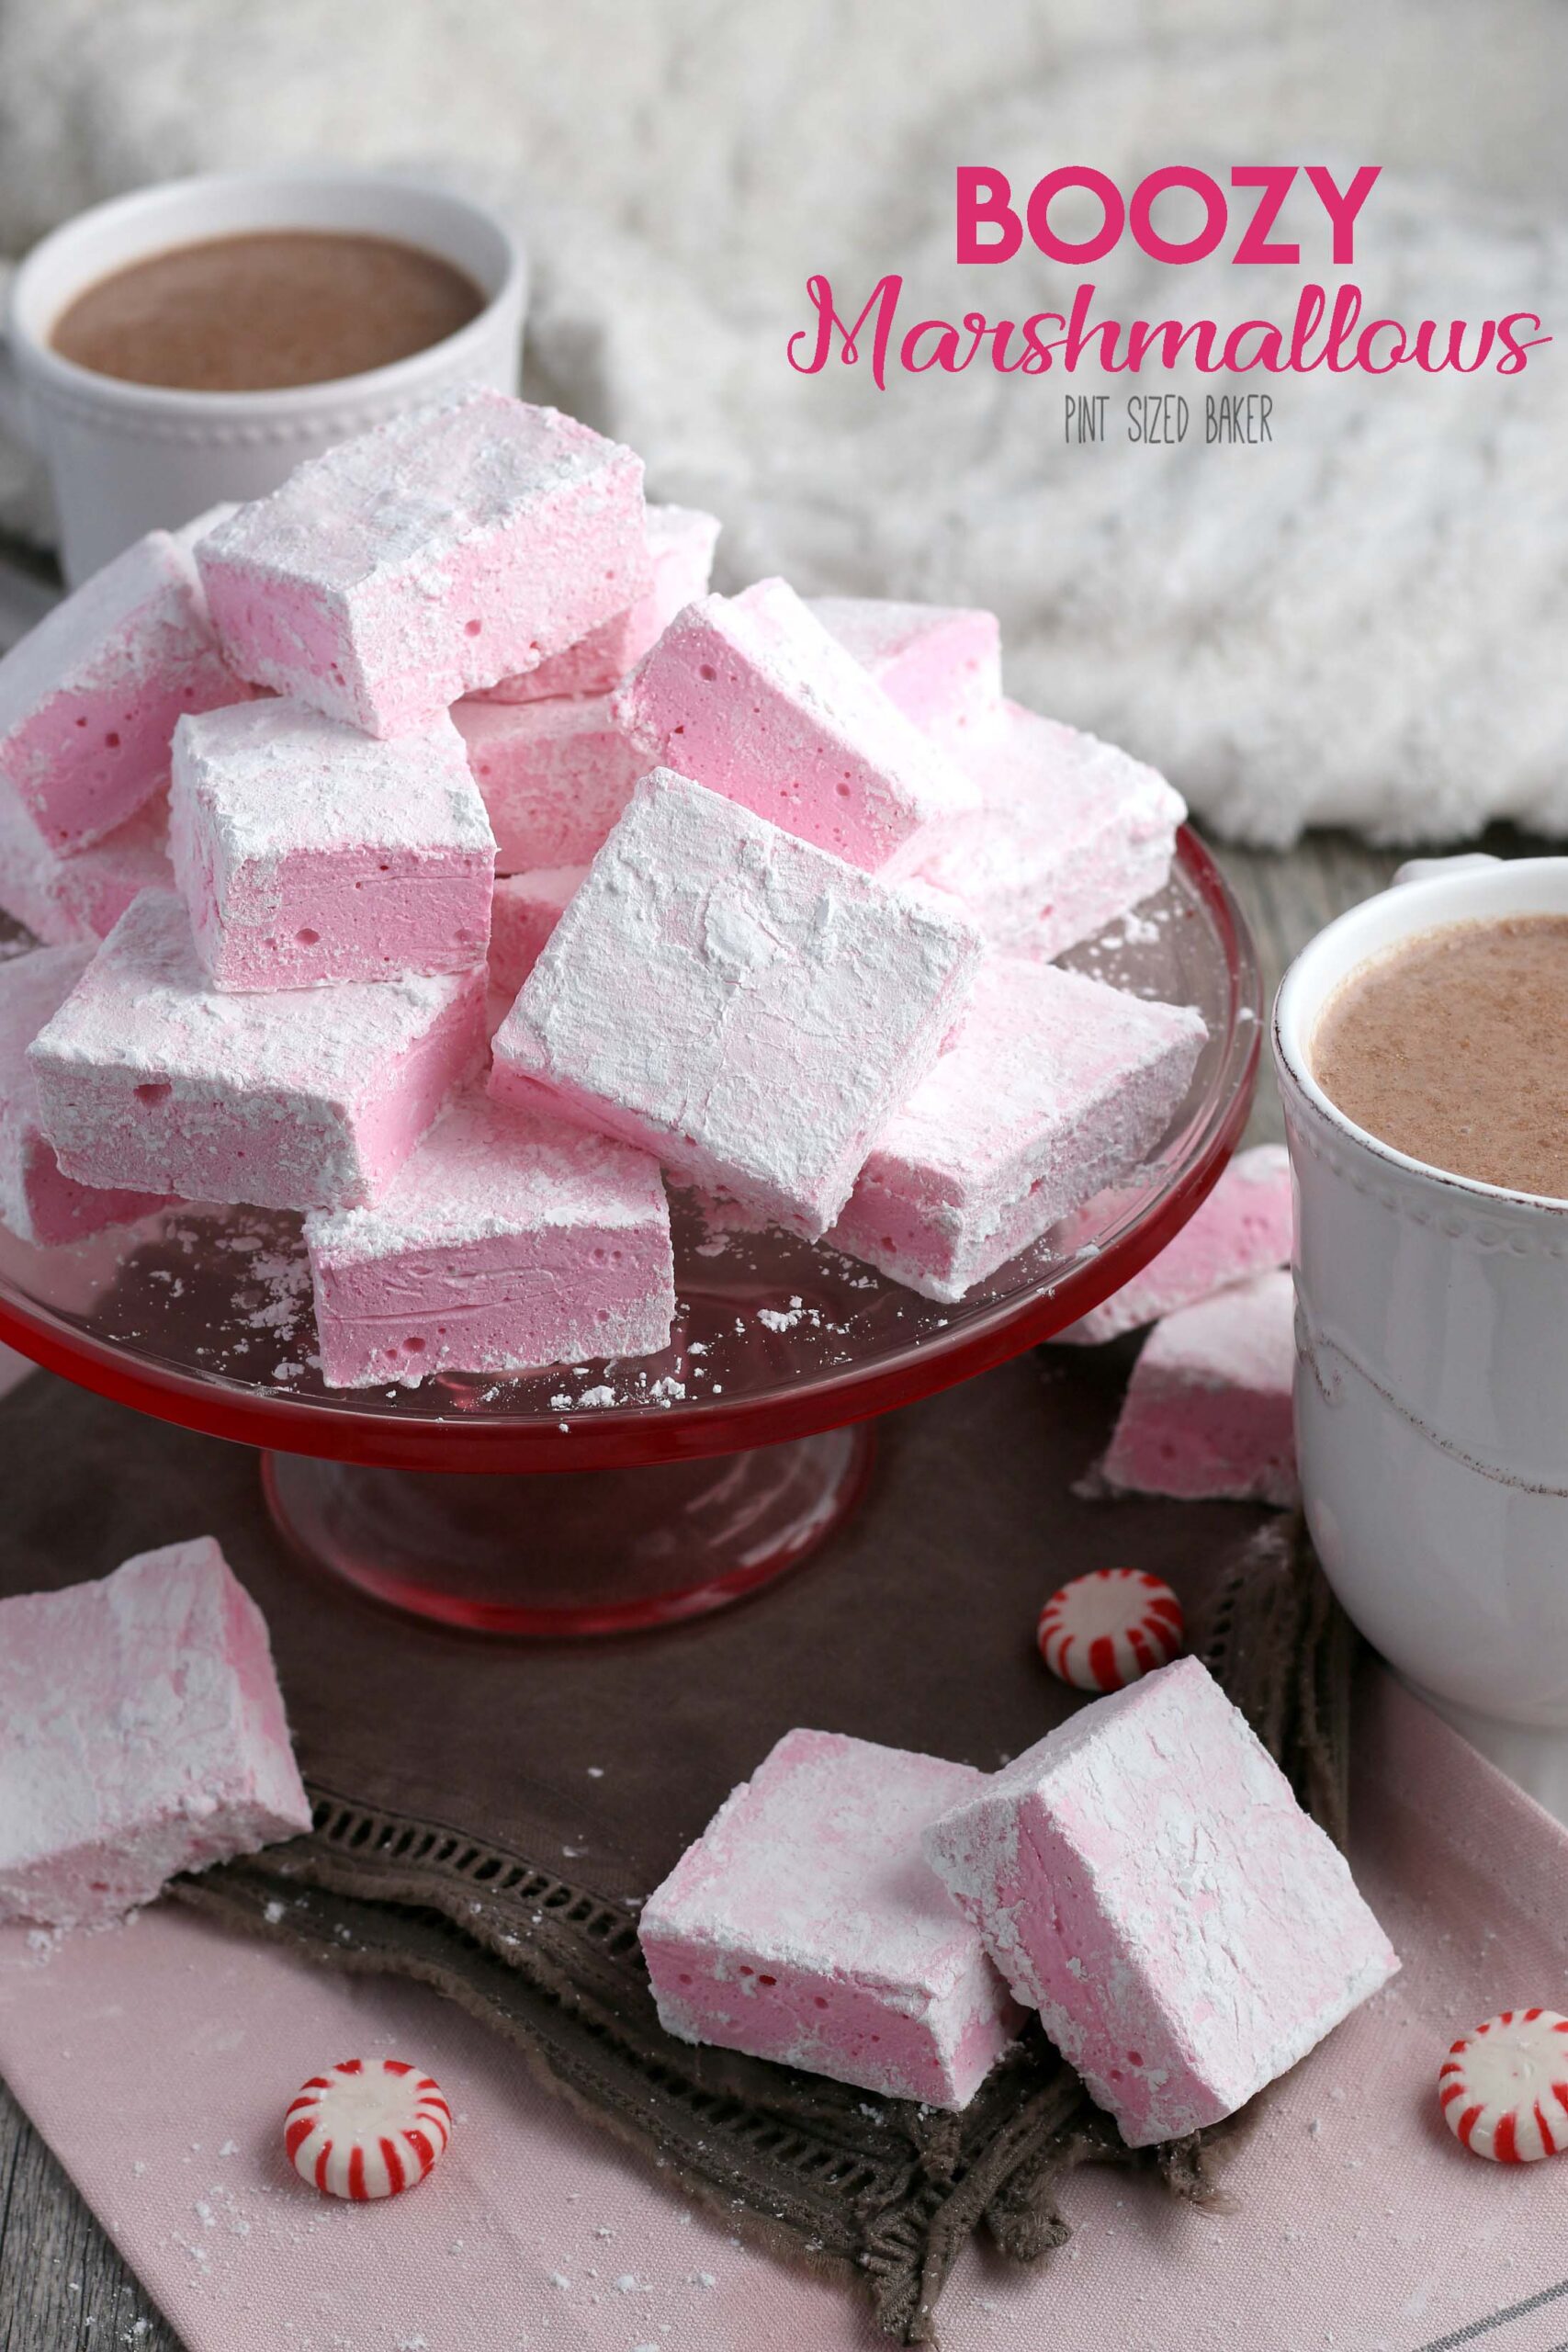 Here we have a recipe for tasty marshmallows with a twist! These boozy marshmallows are delicious and easy alcoholic marshmallows!